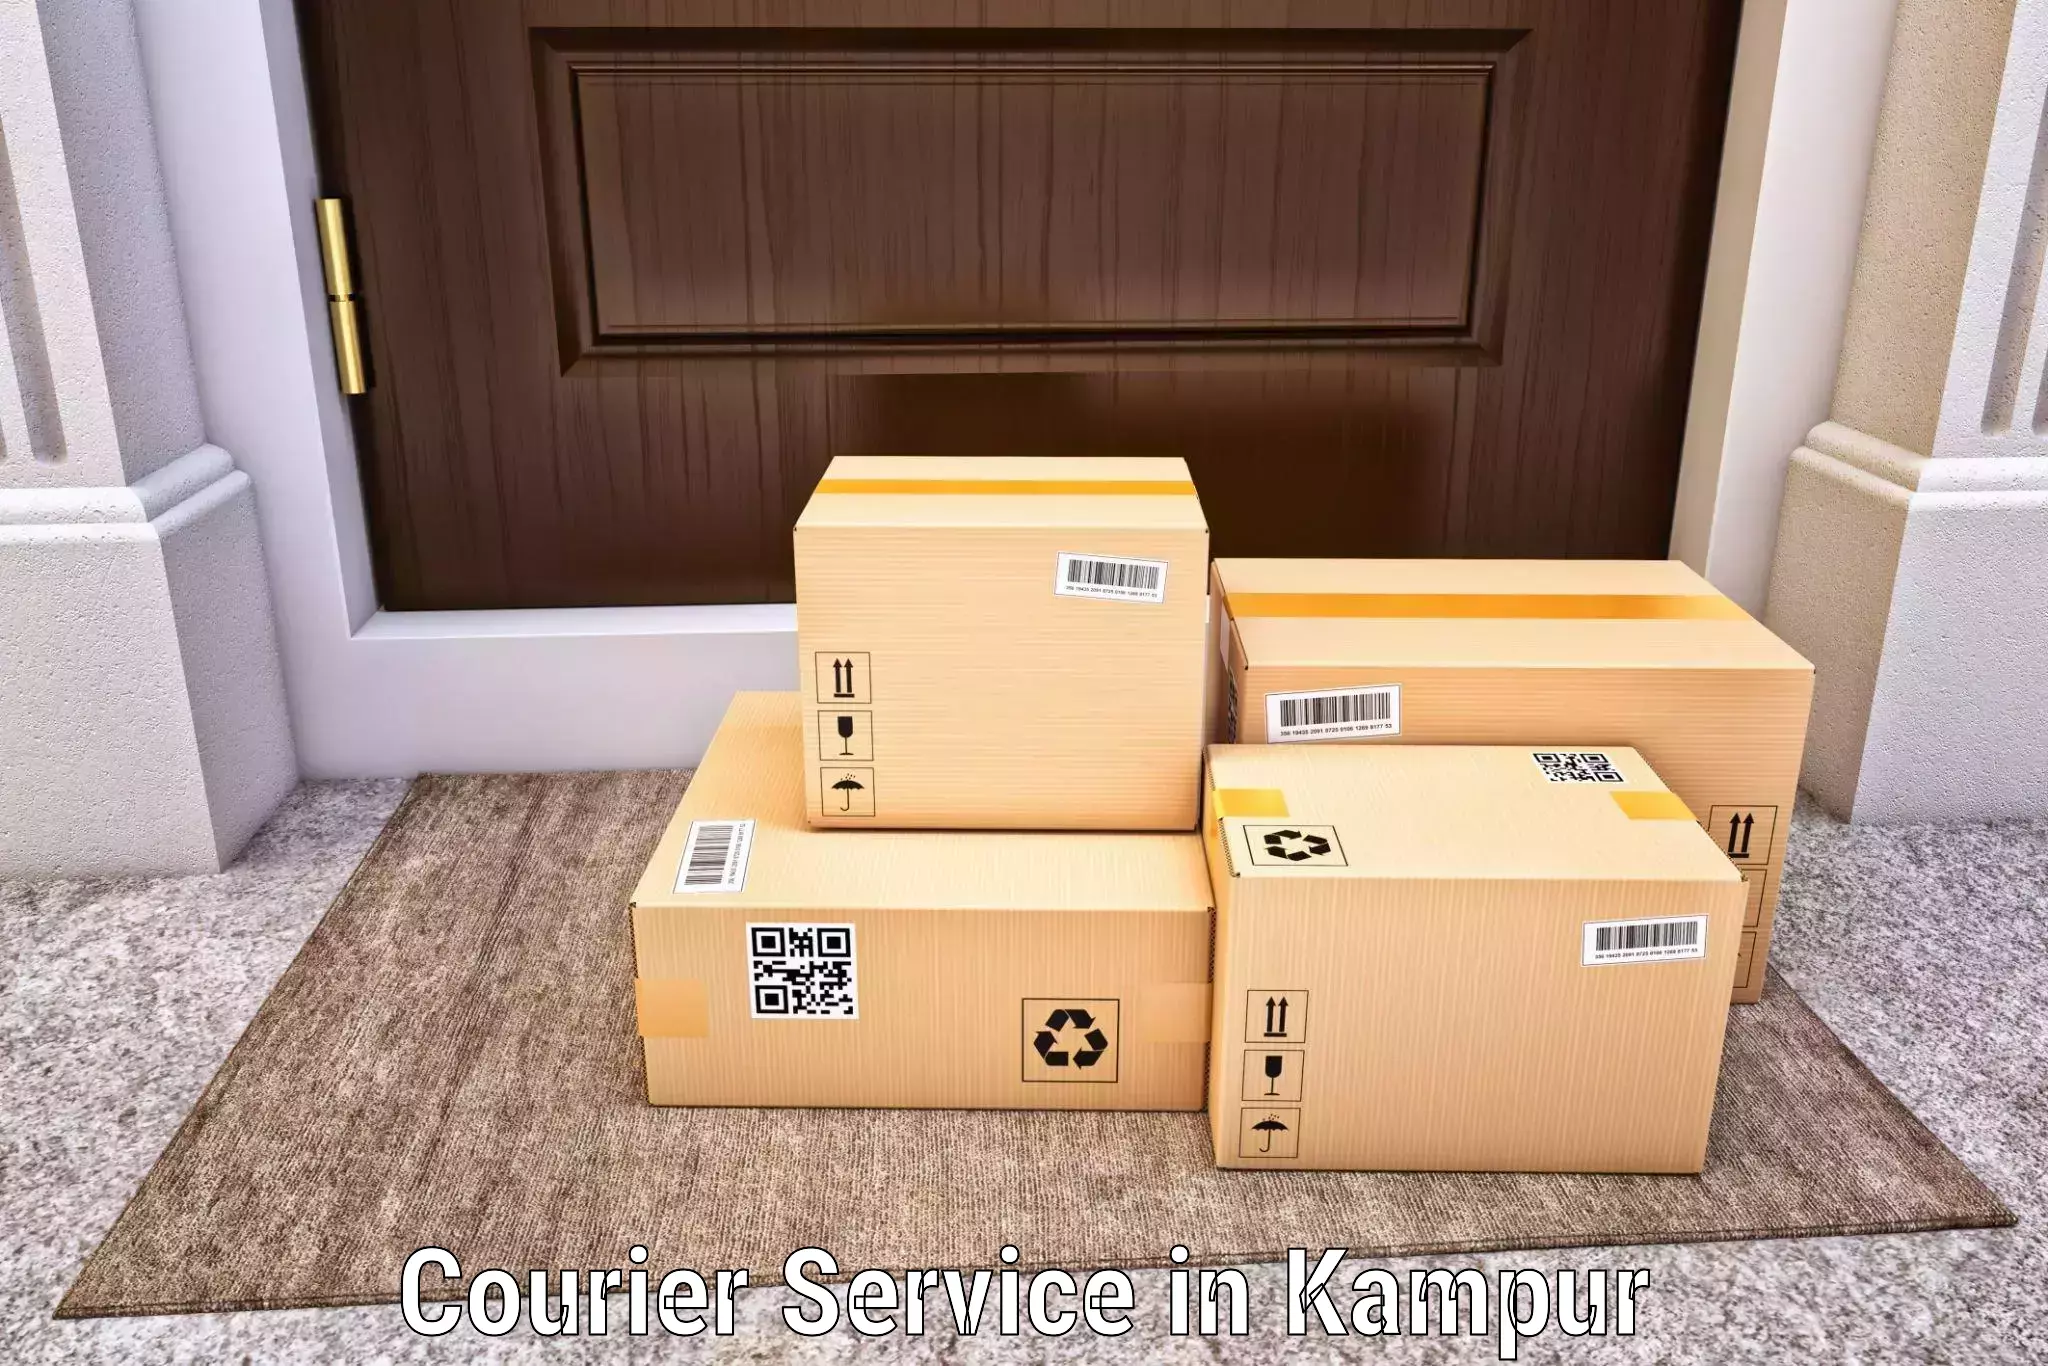 Customer-oriented courier services in Kampur